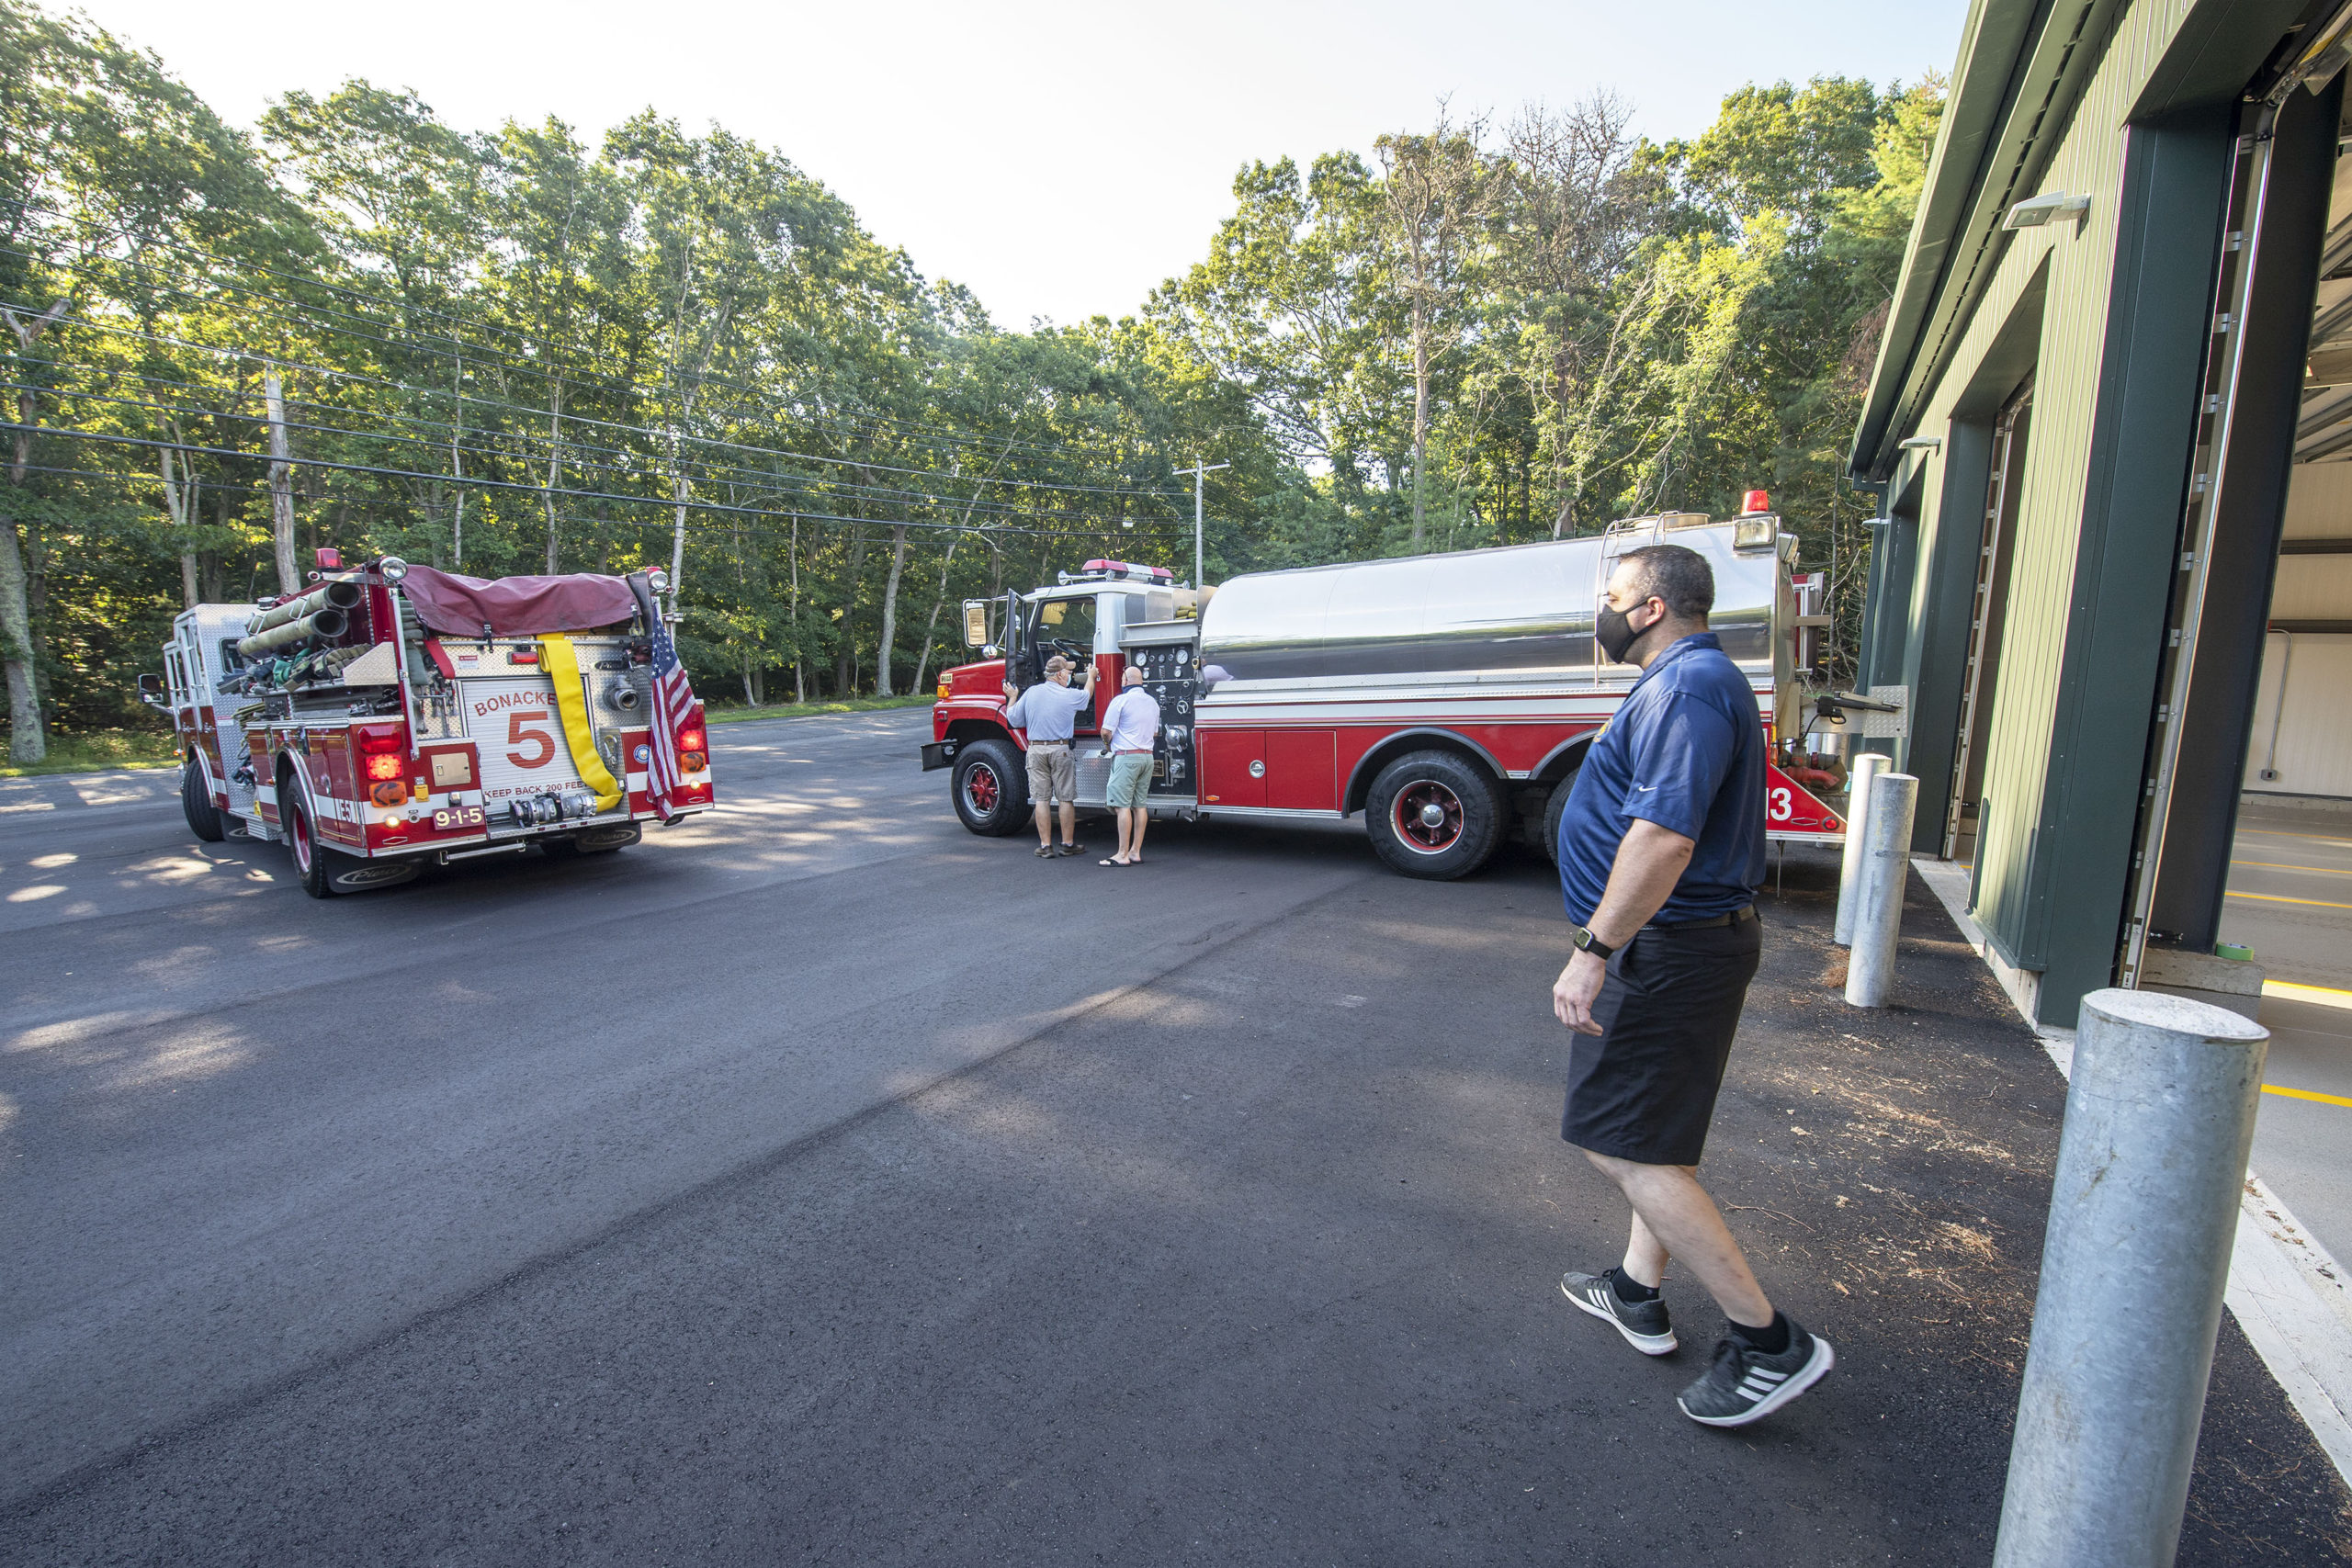 East Hampton Fire Department First Assistant Chief Duane Forrester helps guide Engine 9-1-5 into place as East Hampton Fire Department trucks 9-1-5, 9-1-10 and 9-1-13 are moved into the brand new EHFD Substation on Old Northwest Road on Saturday.   MICHAEL HELLER